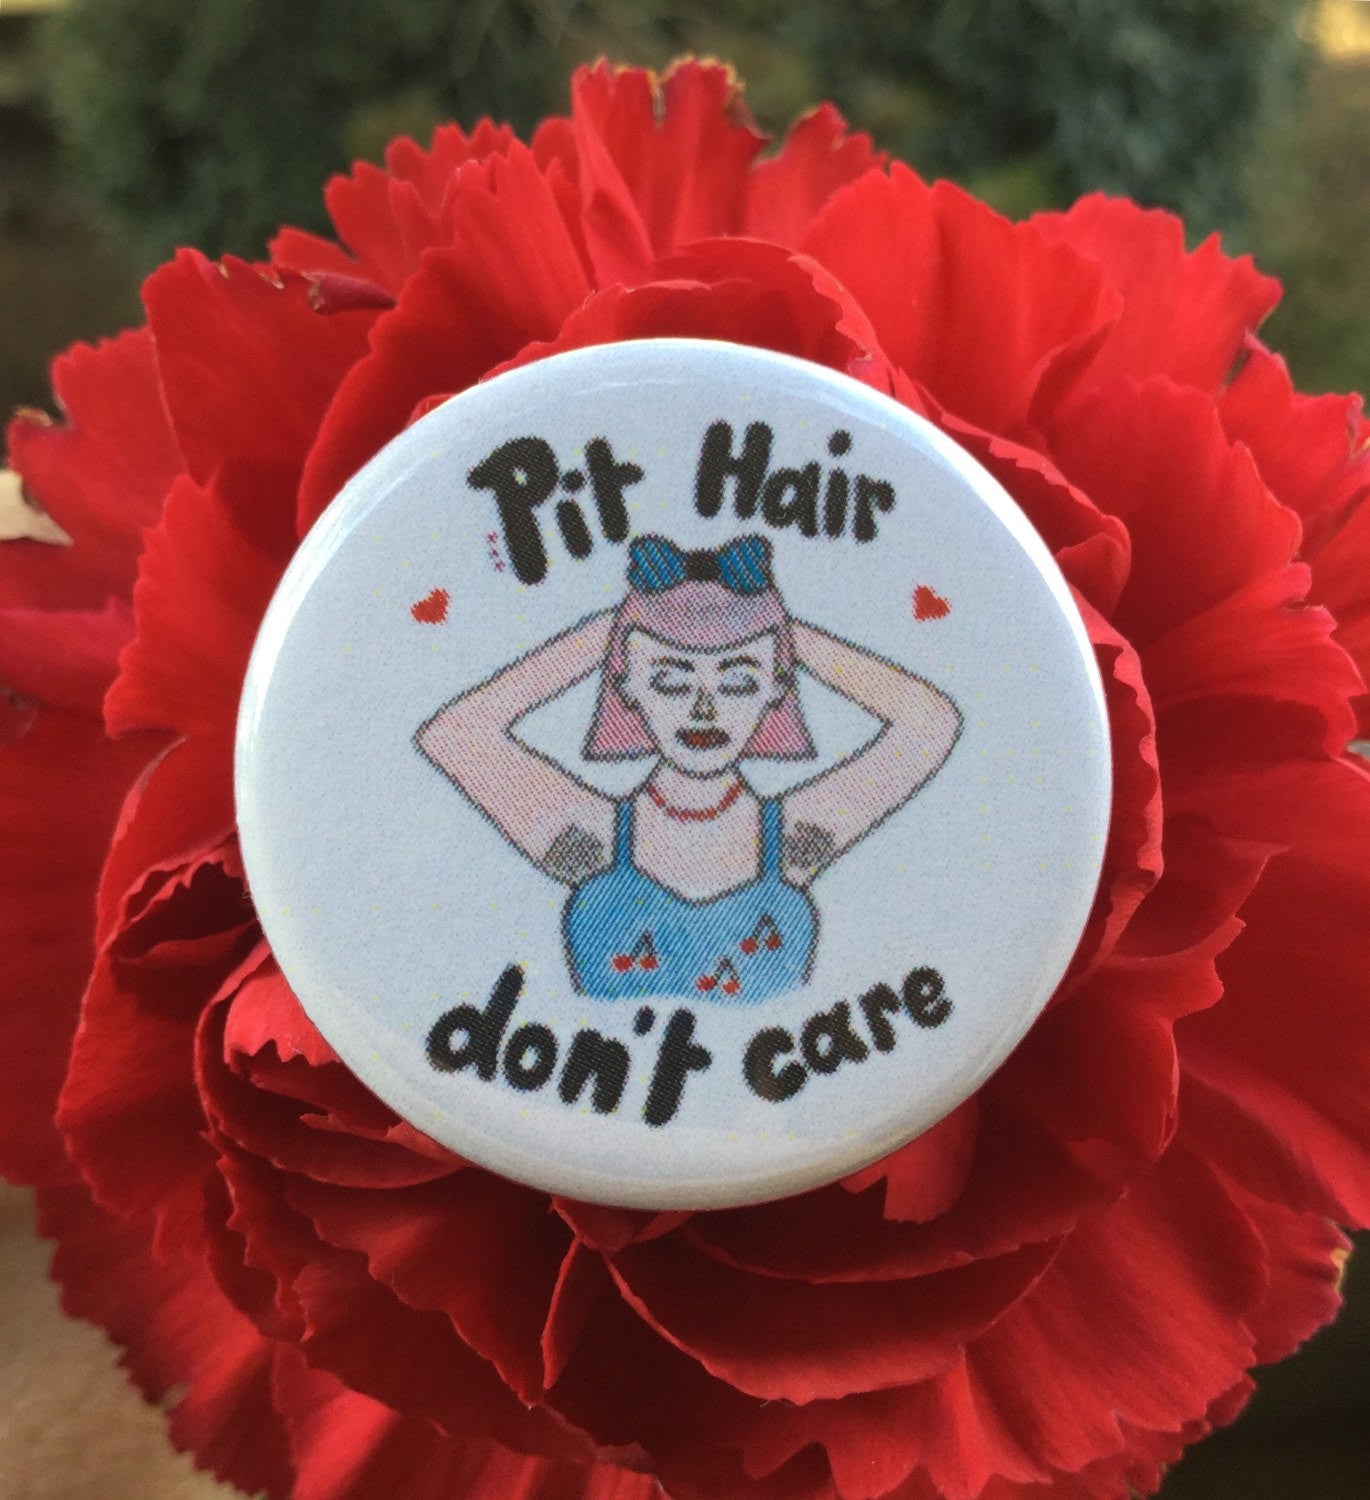 Pit hair don't care button - Radical Buttons